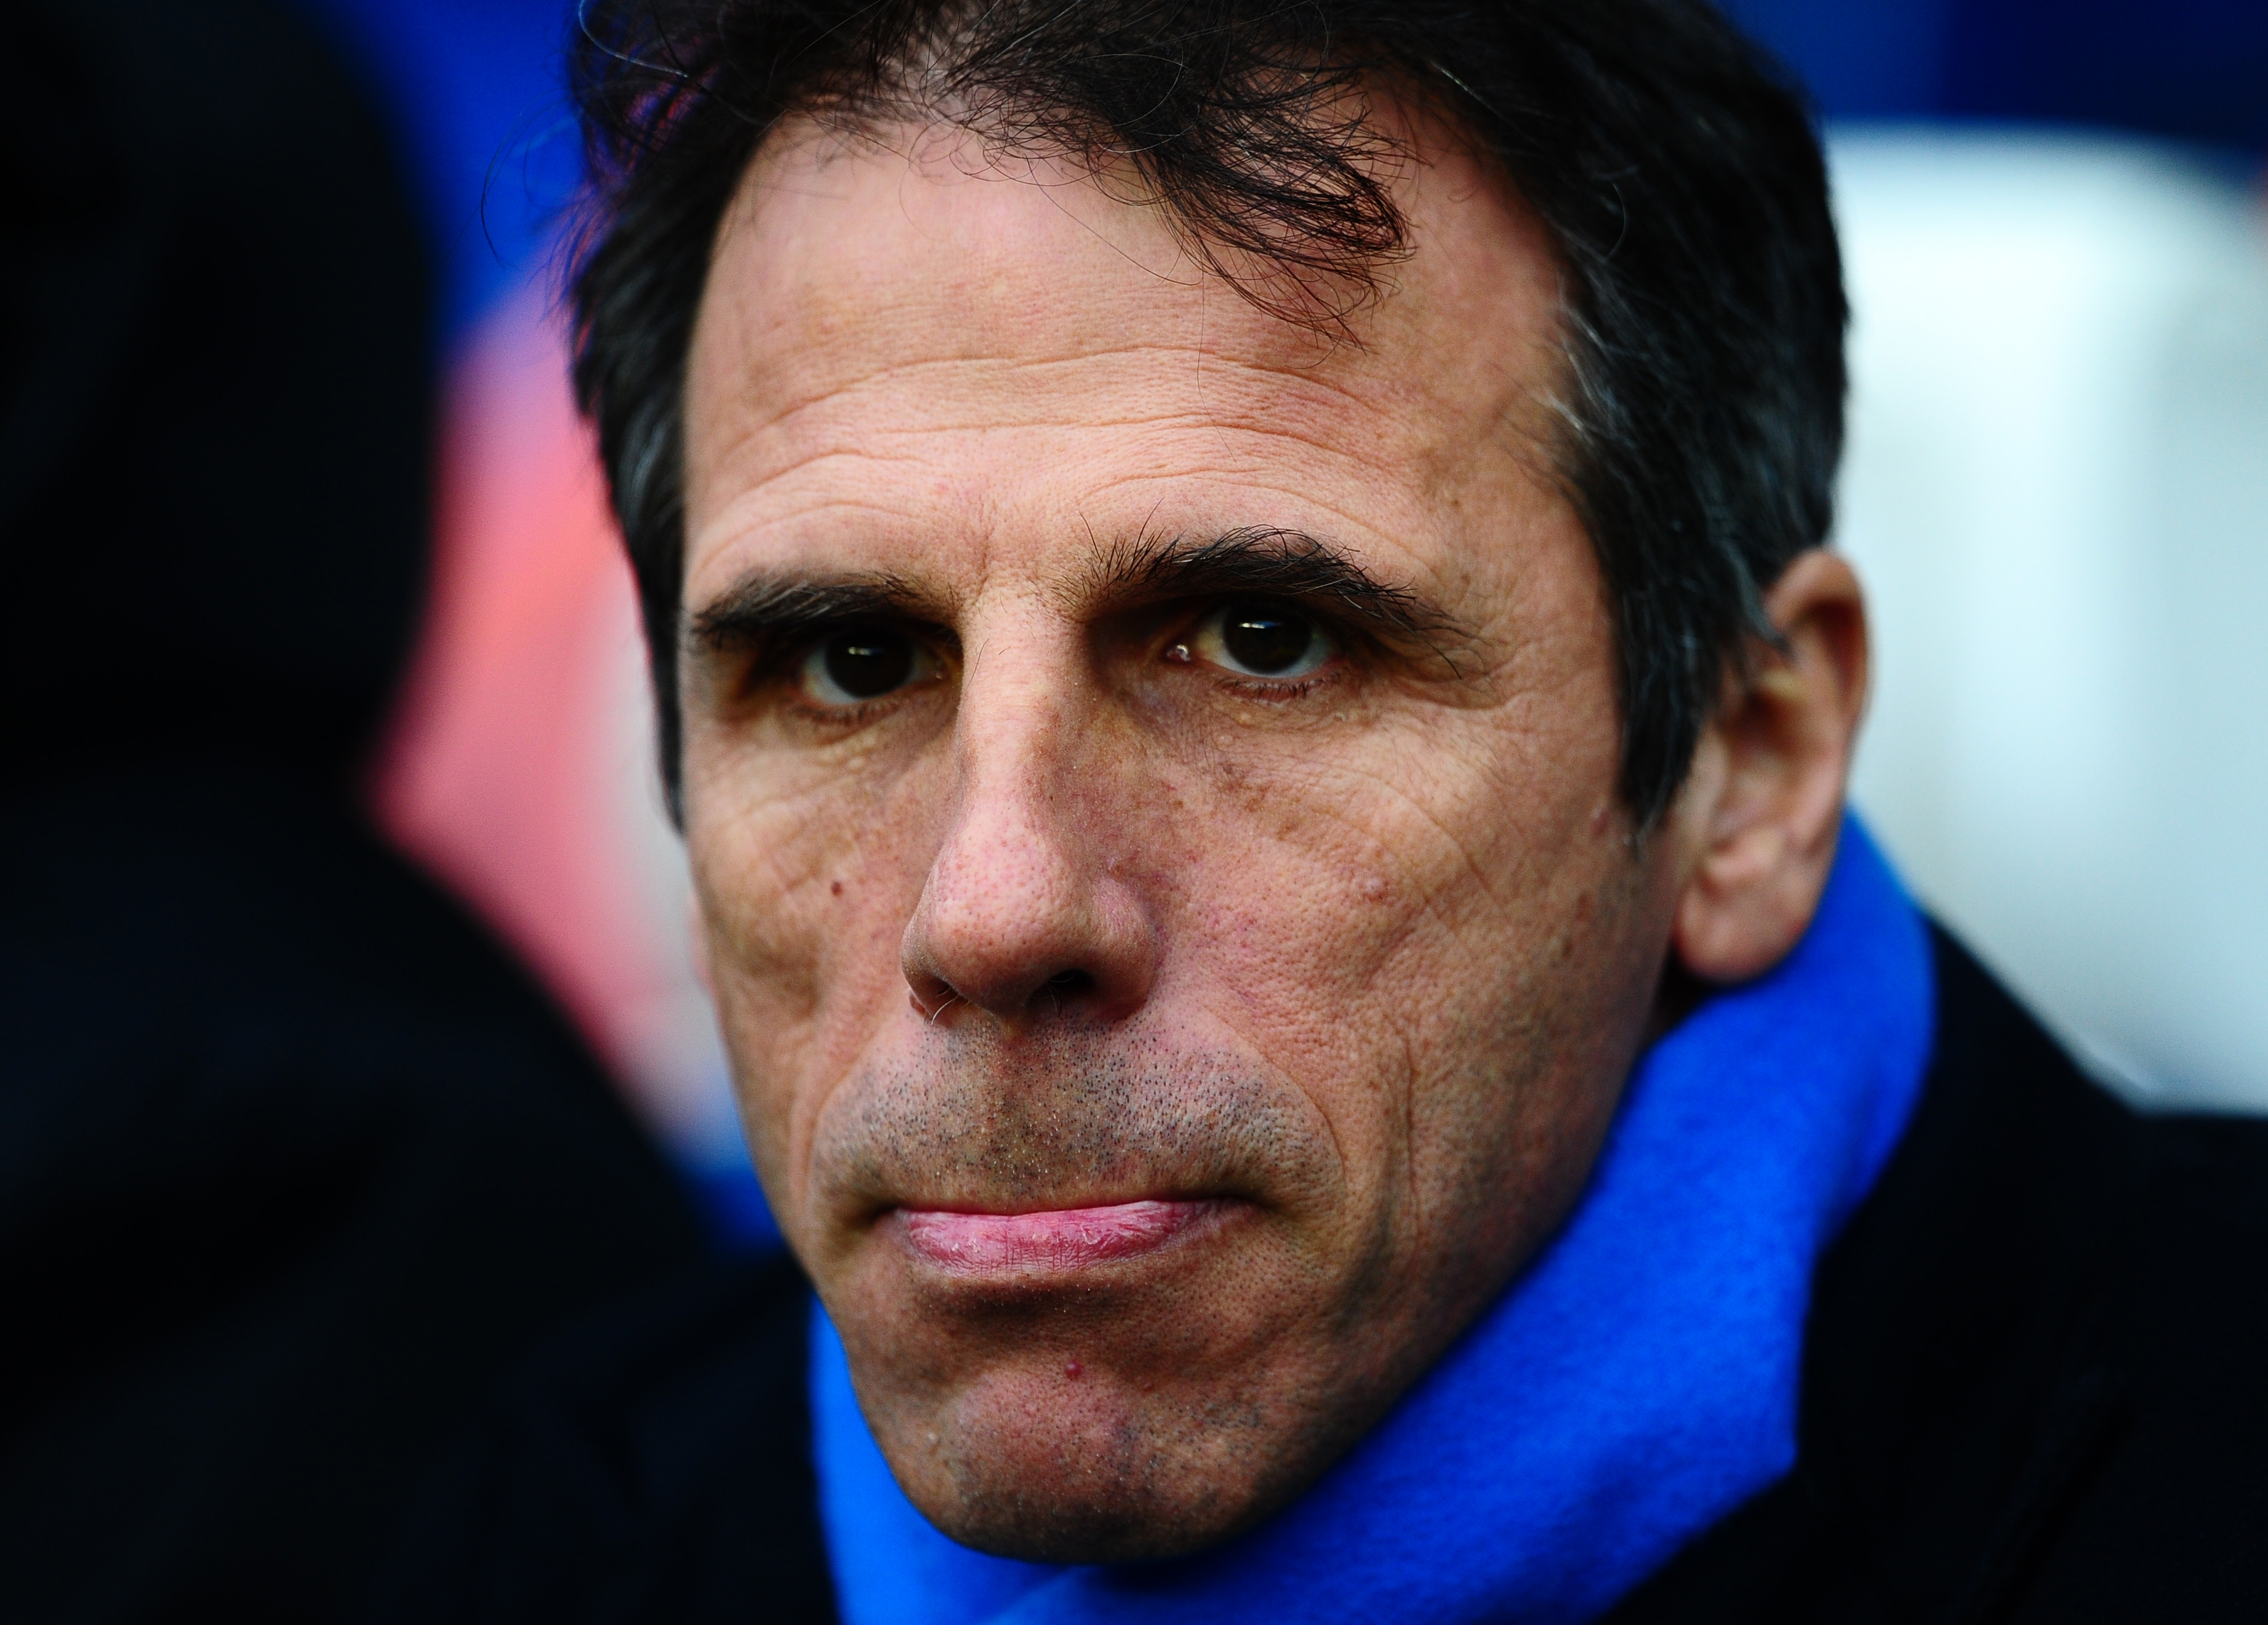 Napoli & Parma Legend Gianfranco Zola: “Inter Are In Excellent Form, Simone Inzaghi Has Done Well”